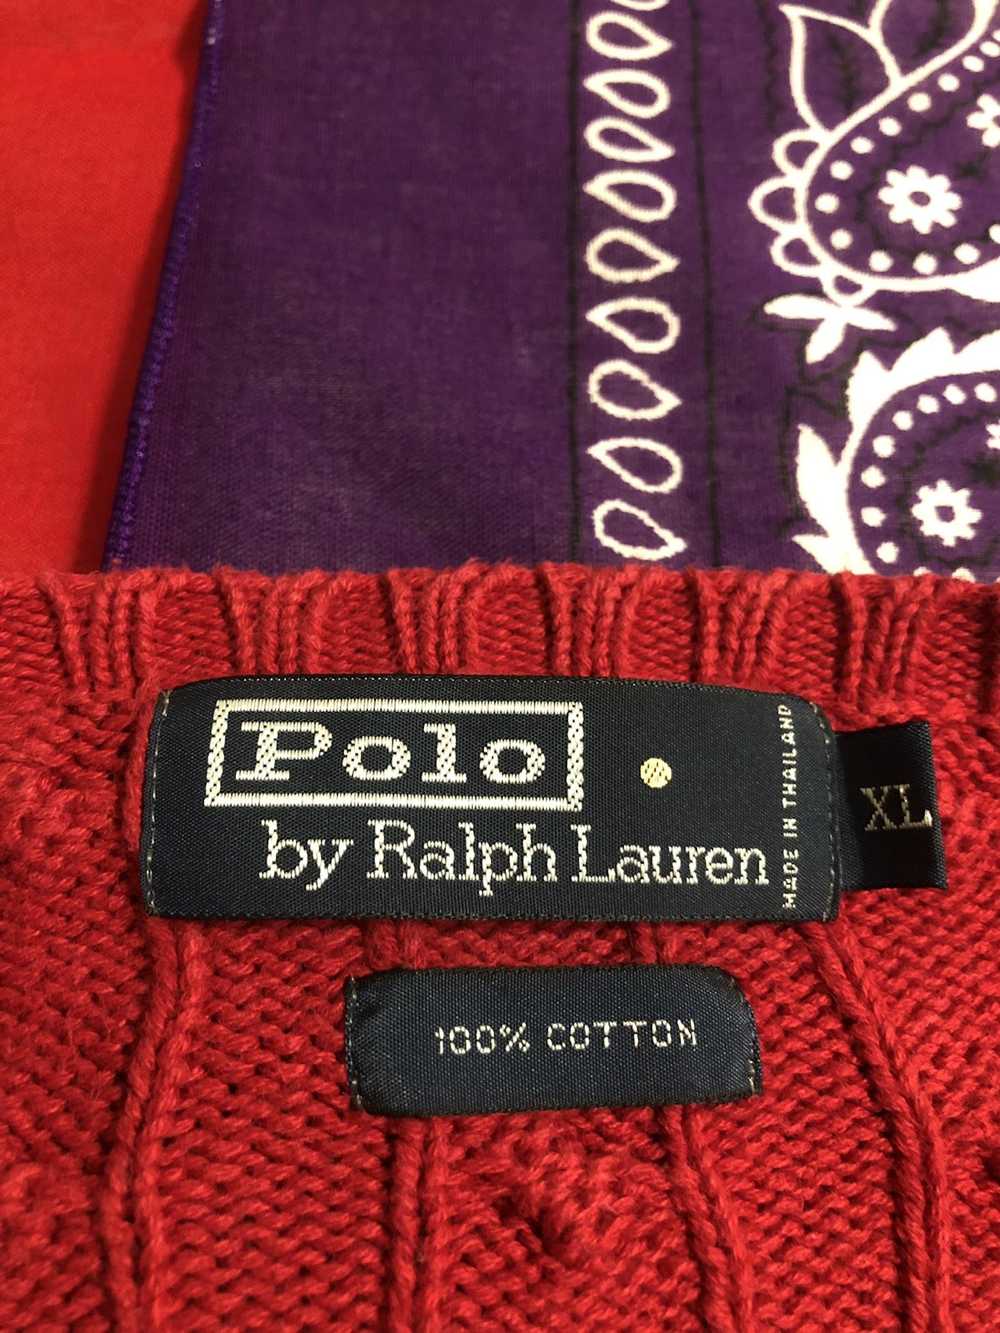 Polo Ralph Lauren Vintage Polo knitted red sweater - image 2